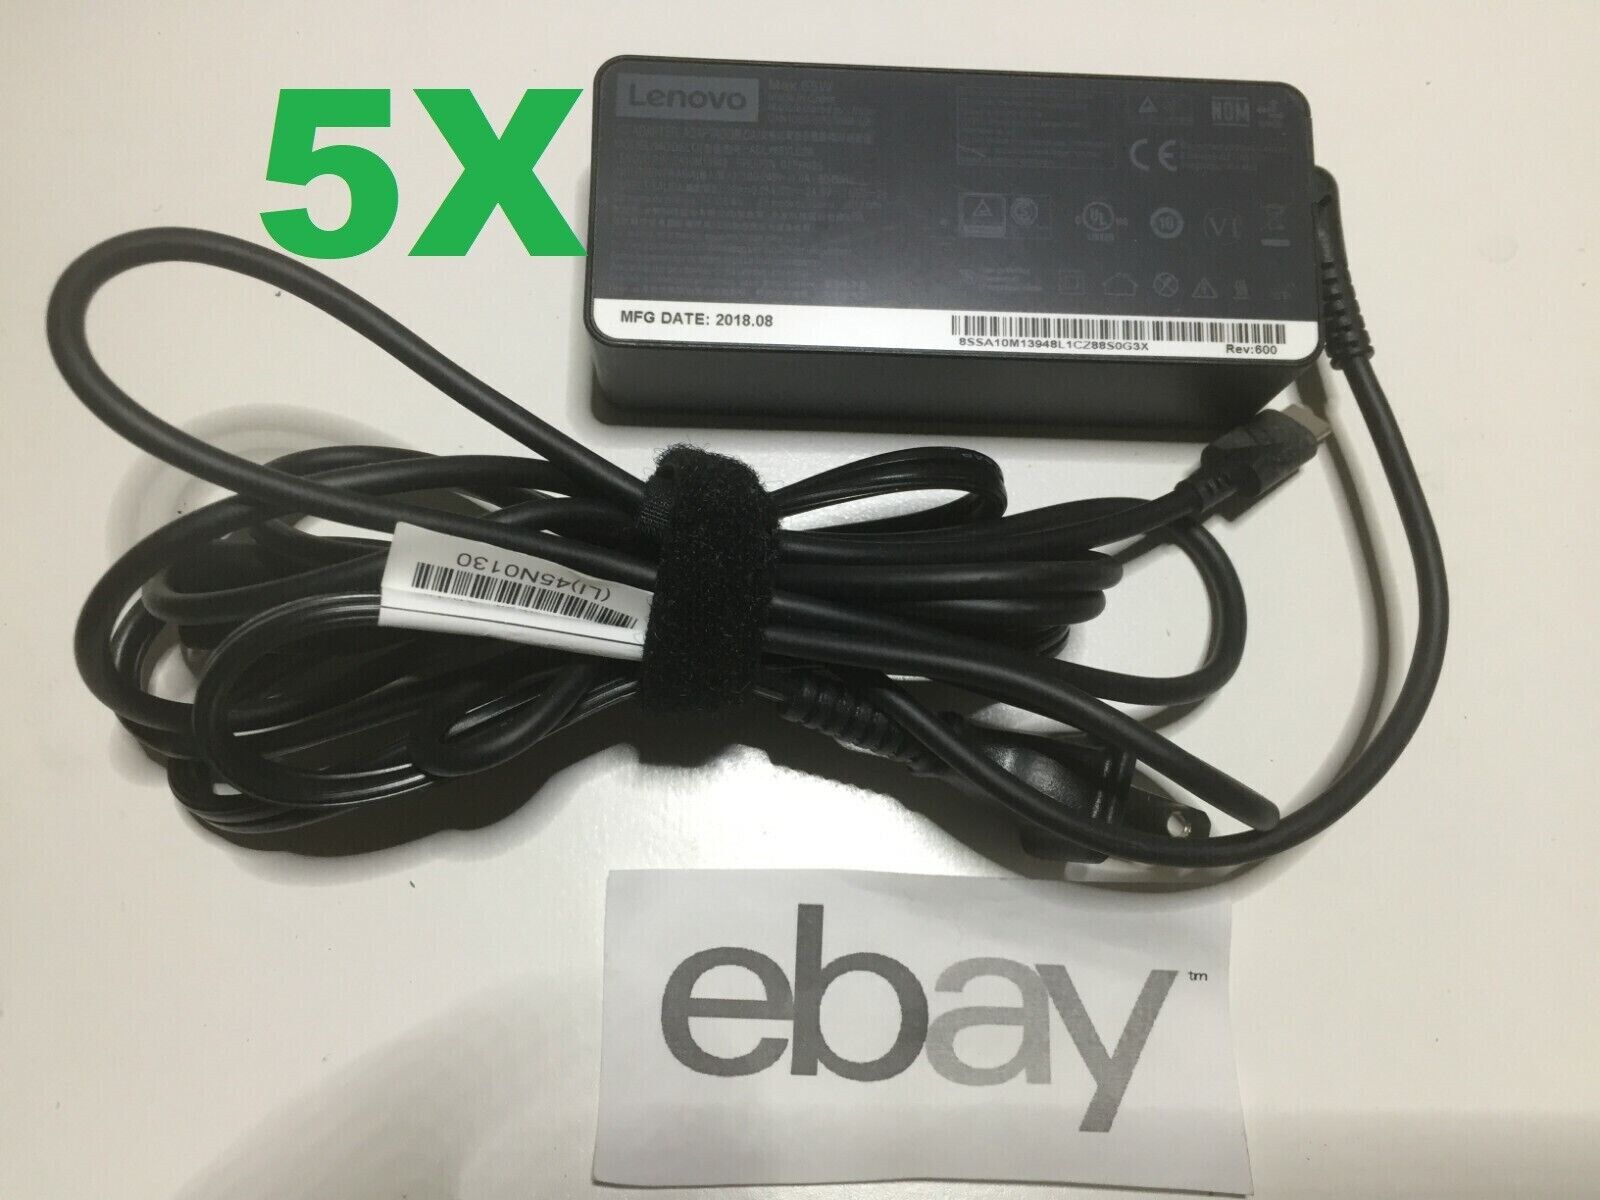 LOT OF 5 Lenovo 65w USB-C ADLX65YLC2A Power Charger Adapter w/ Power Cable OEM